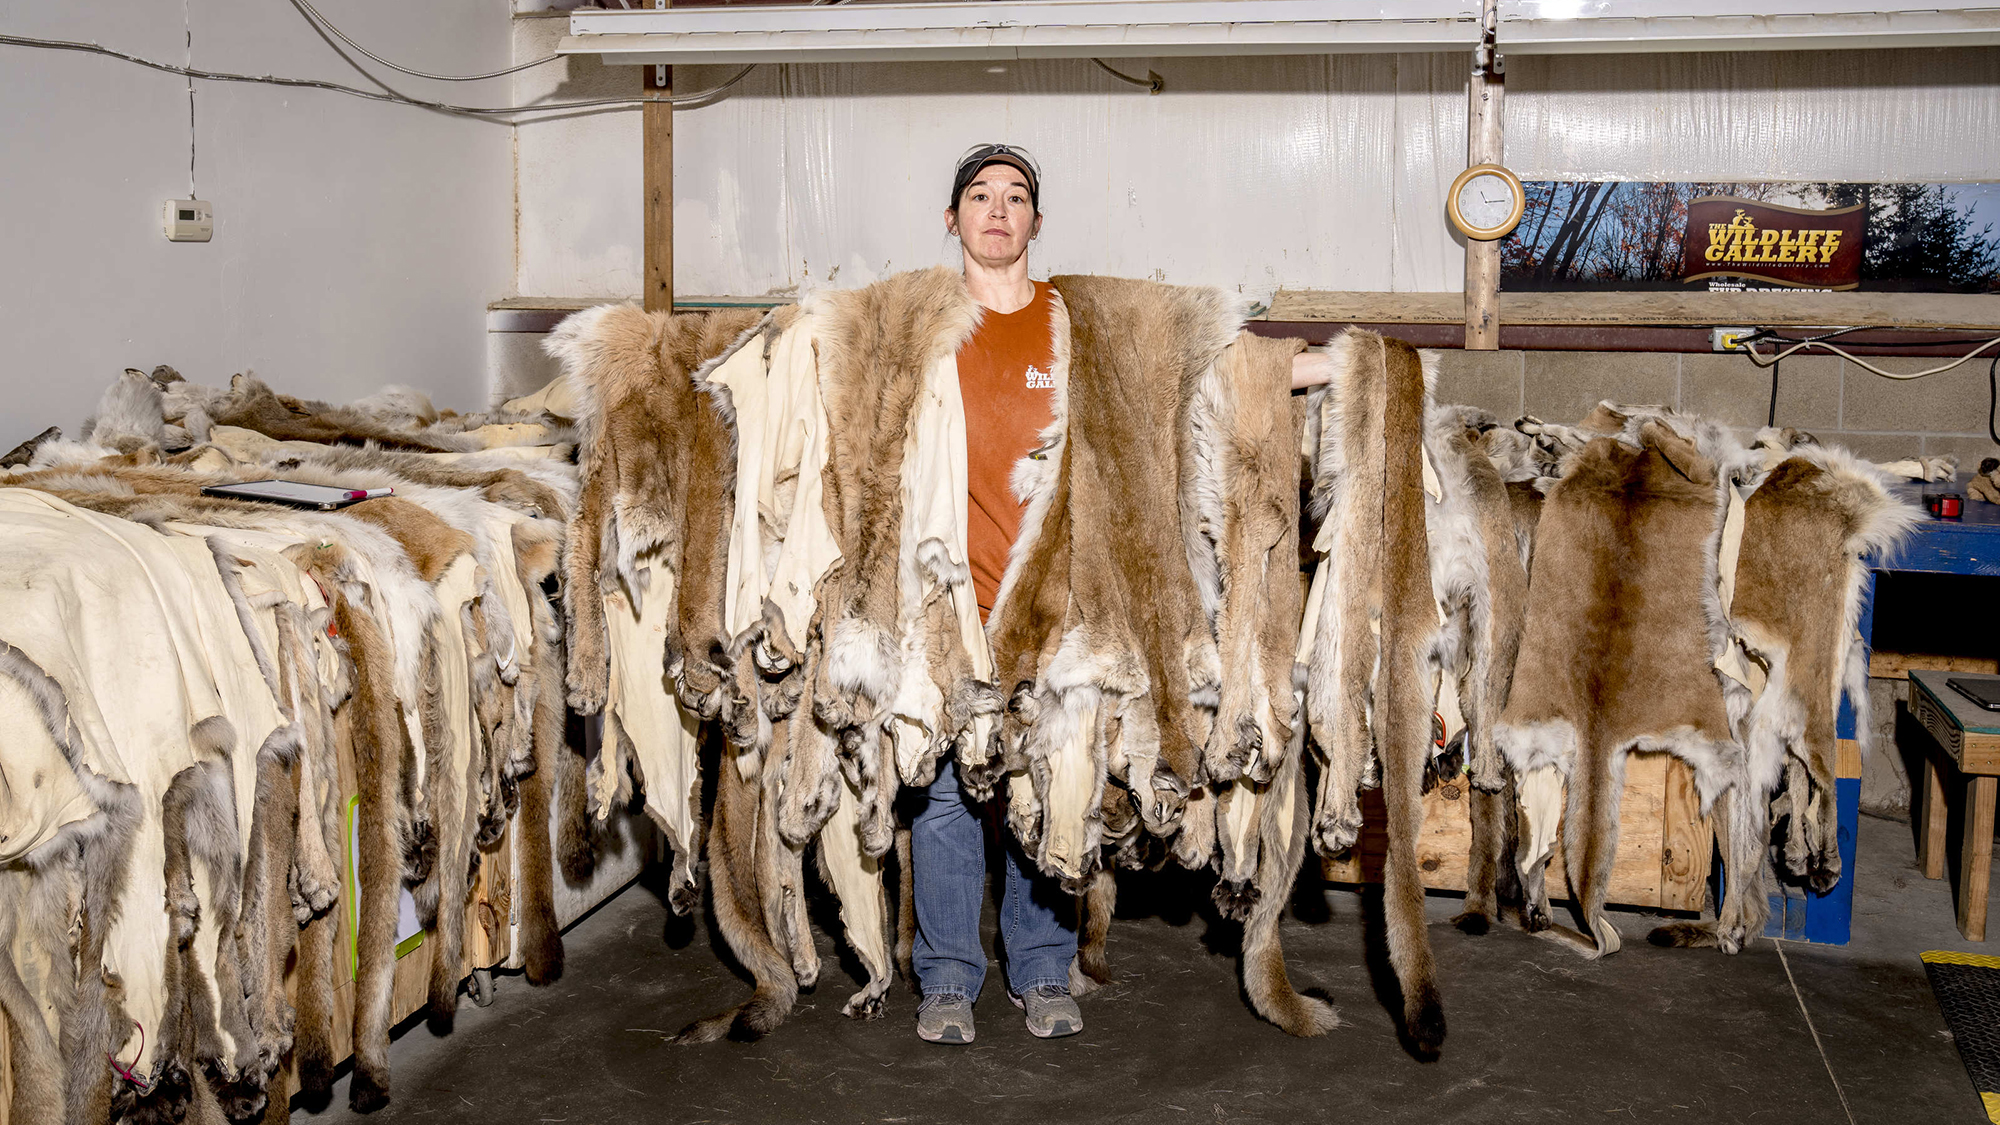 A tannery employee holds up mountain lion hides ready for shipping